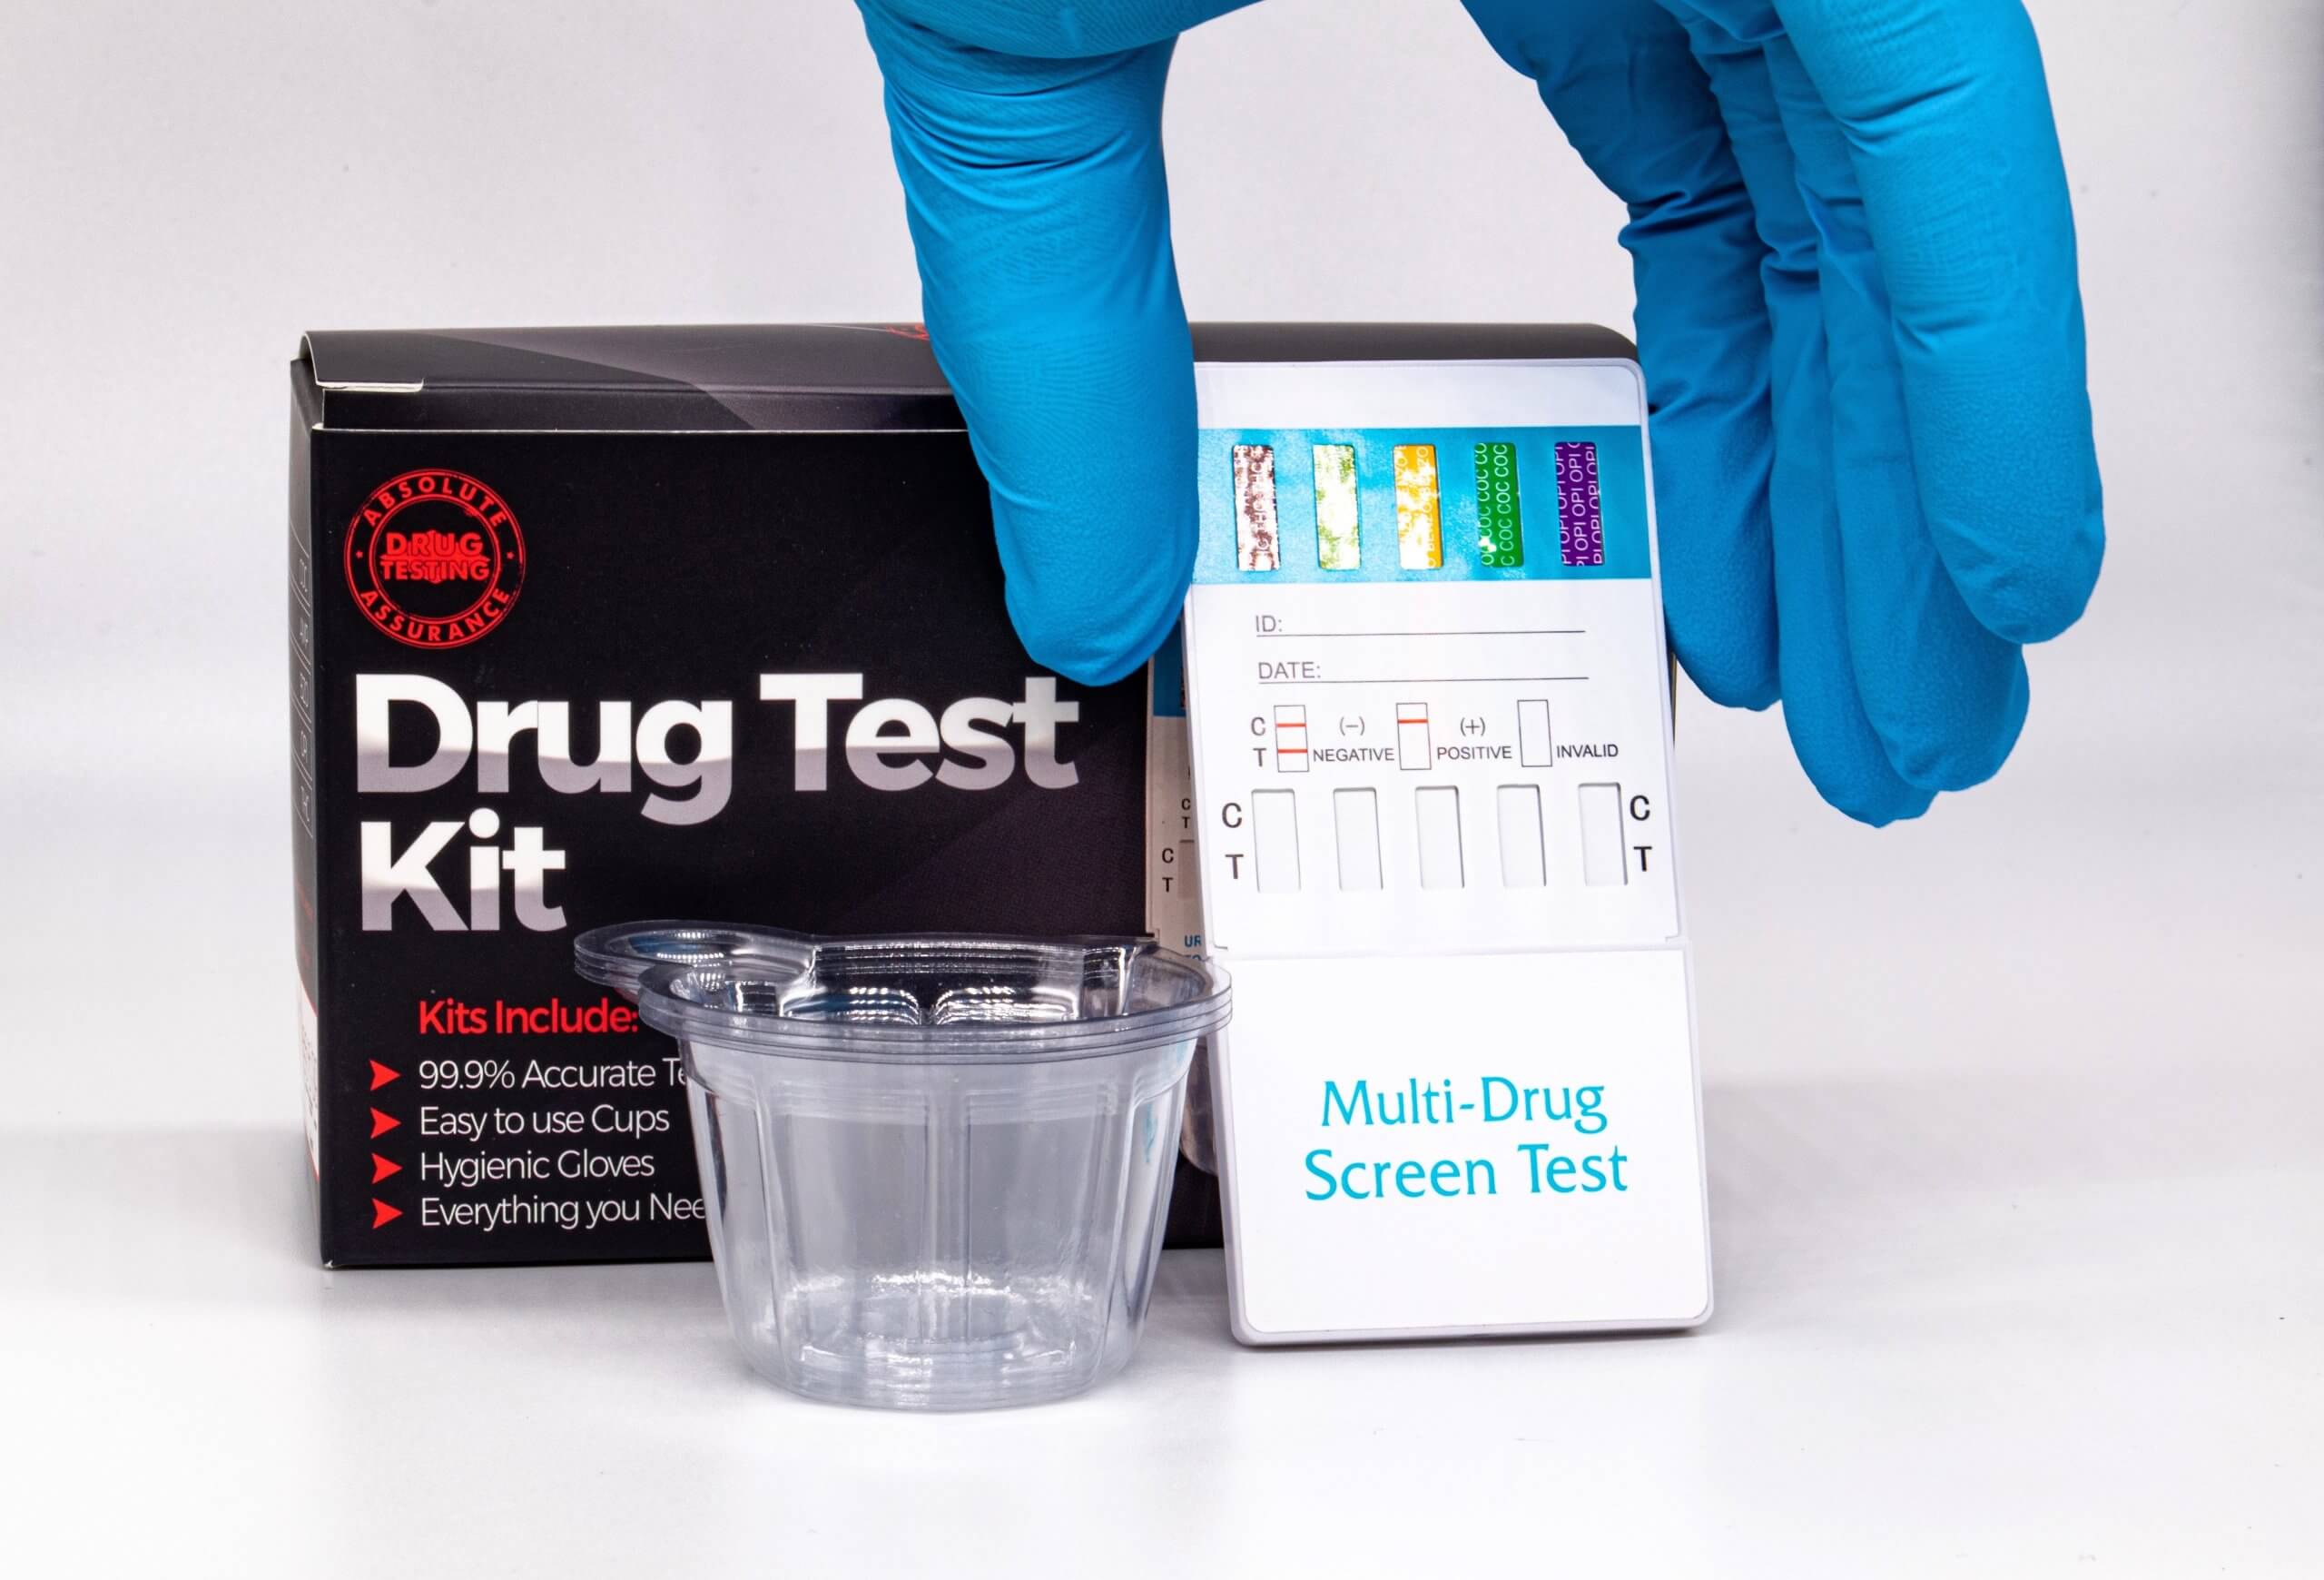 Is Pre-Employment Drug Testing Necessary?